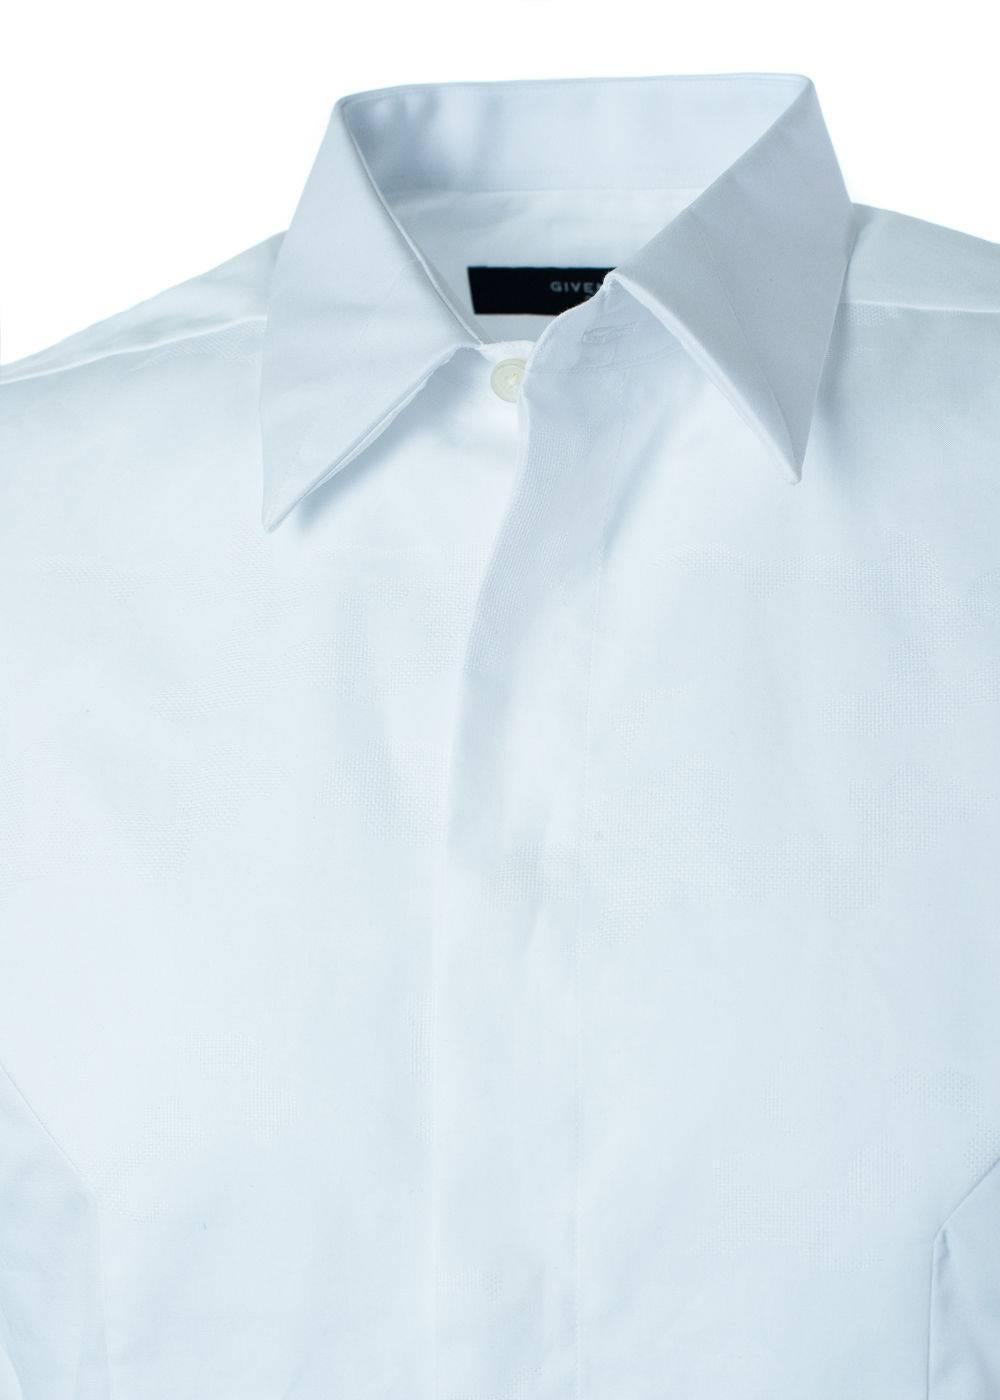 Brand New Givenchy Men's Button Down 
Original Tags
Retails in Stores & Online for $730
Men's Size E45 (S) Fits True to Size

Every man needs a classic white button down for those professional settings or dressy outings. This Givenchy button down is